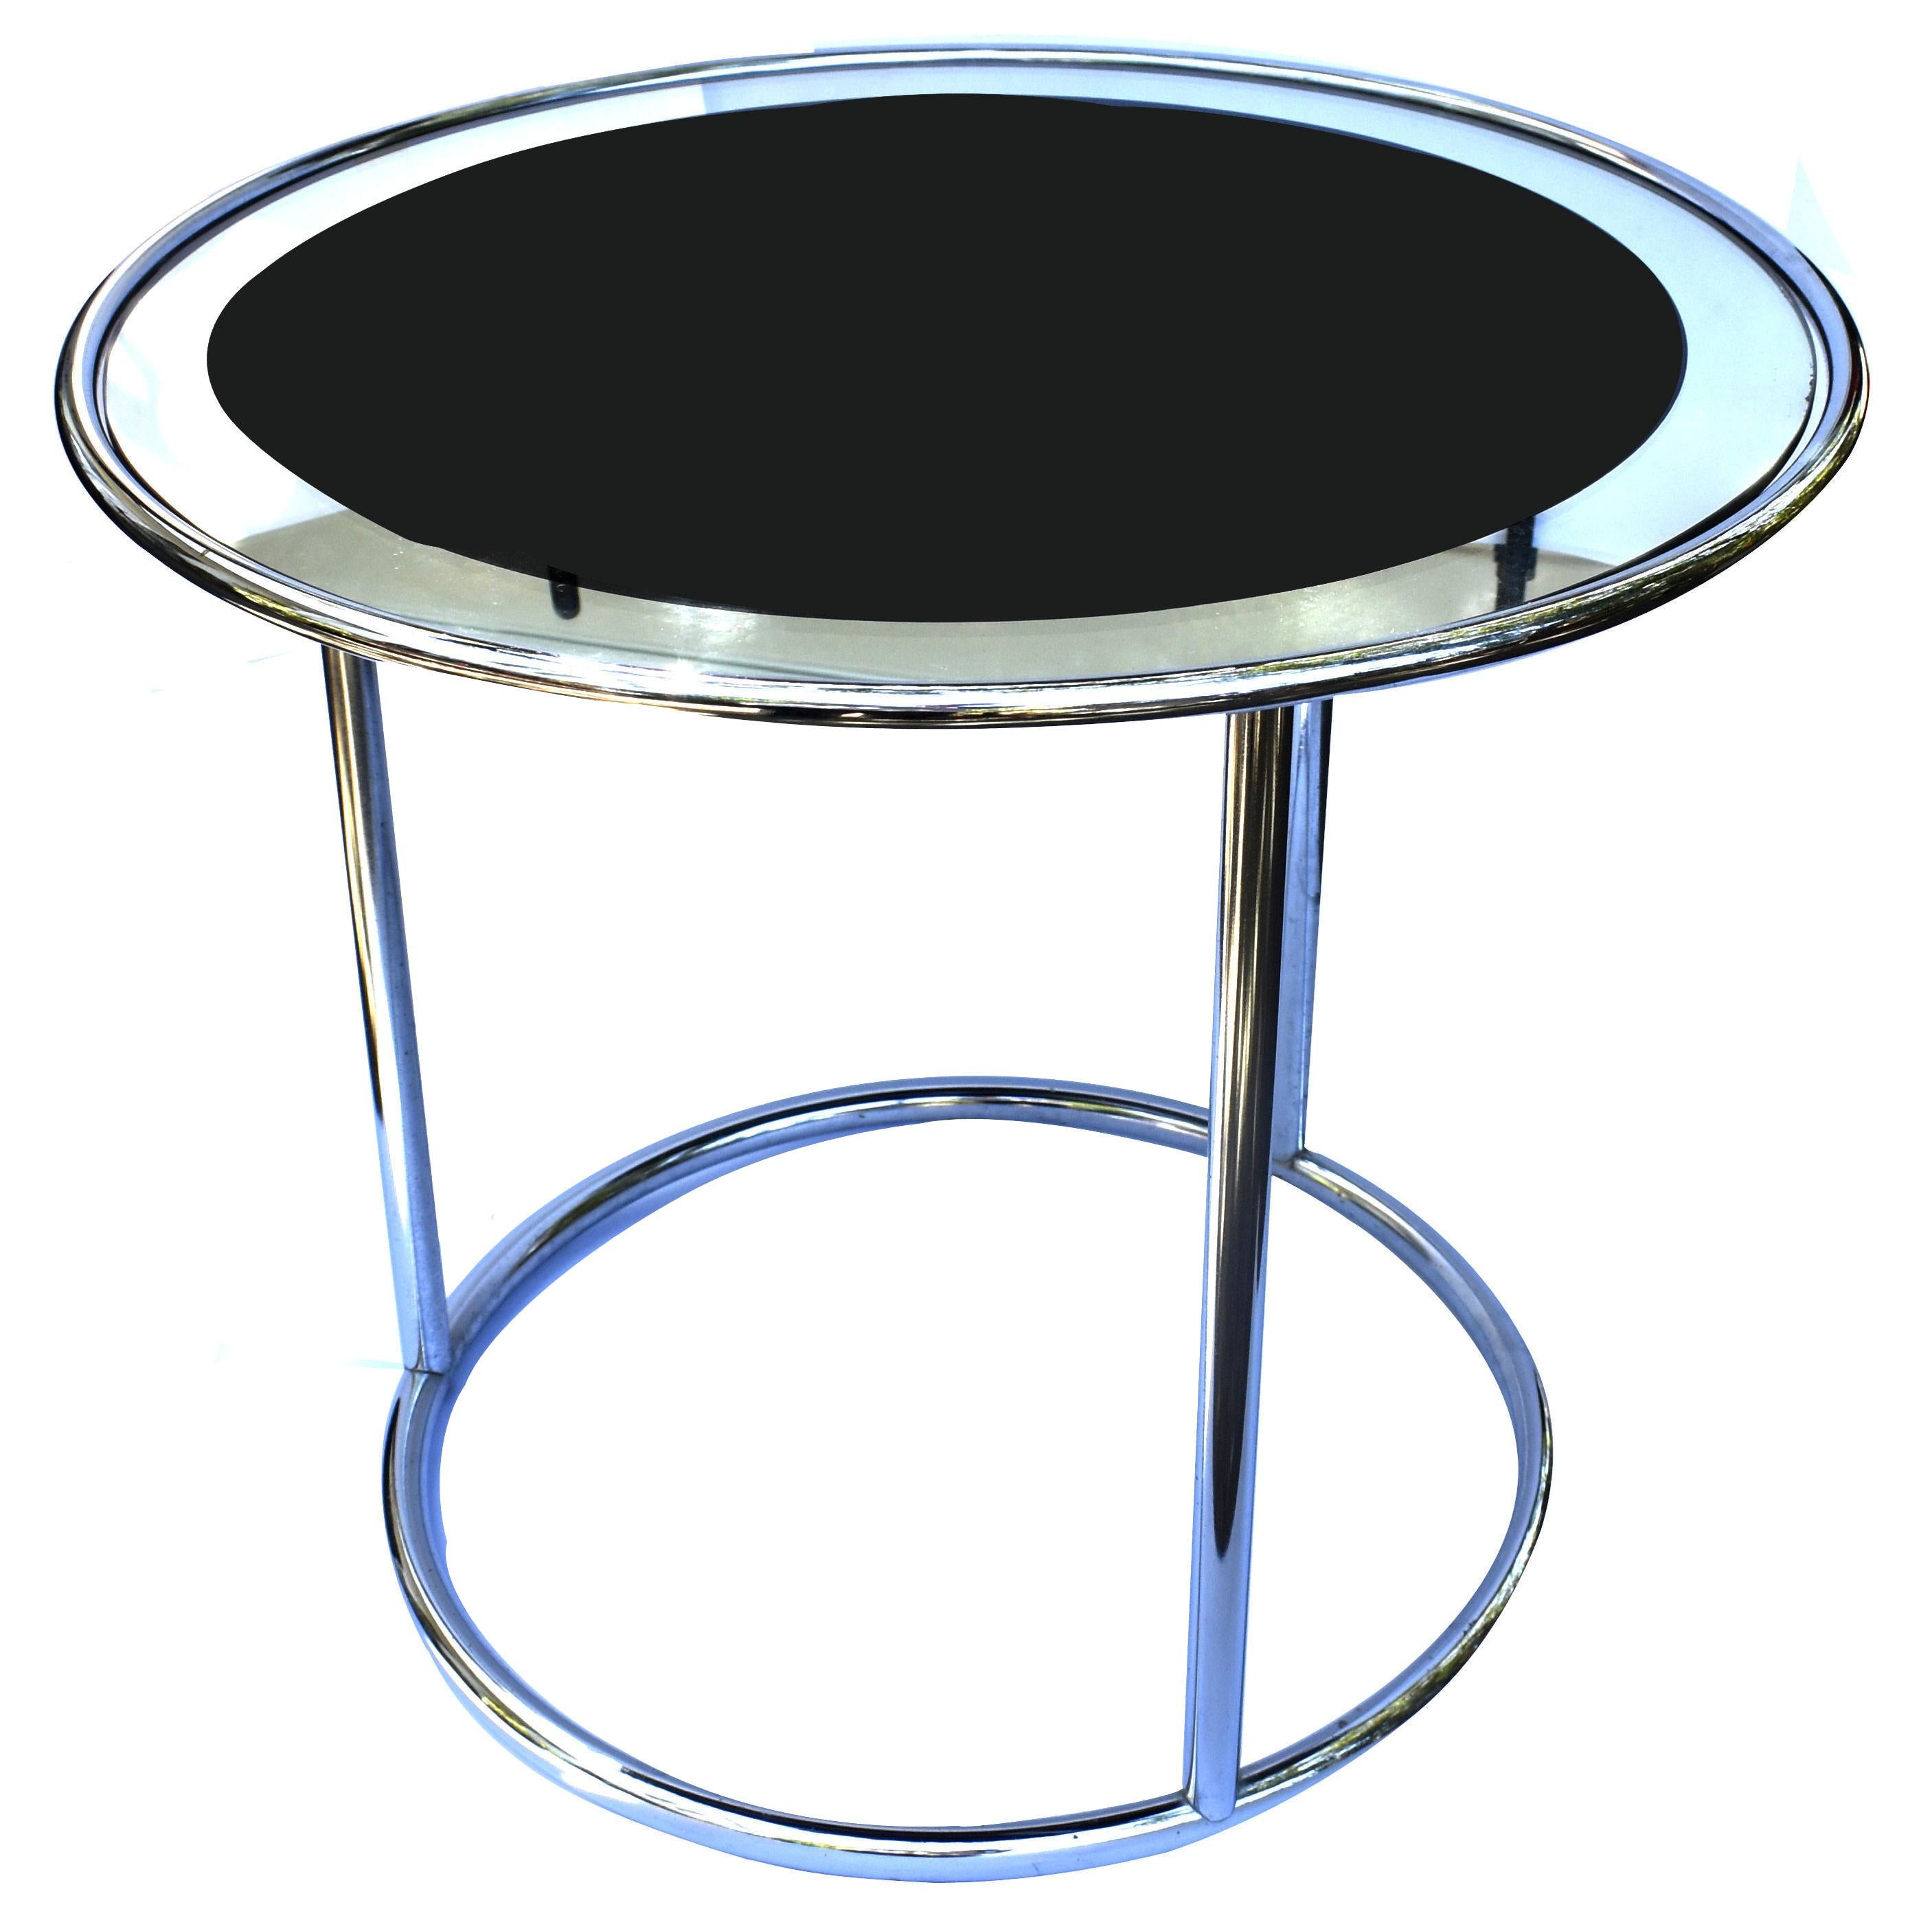 Art Deco Chrome & Glass Modernist Occasional Cocktail Table, English, C1930's For Sale 2